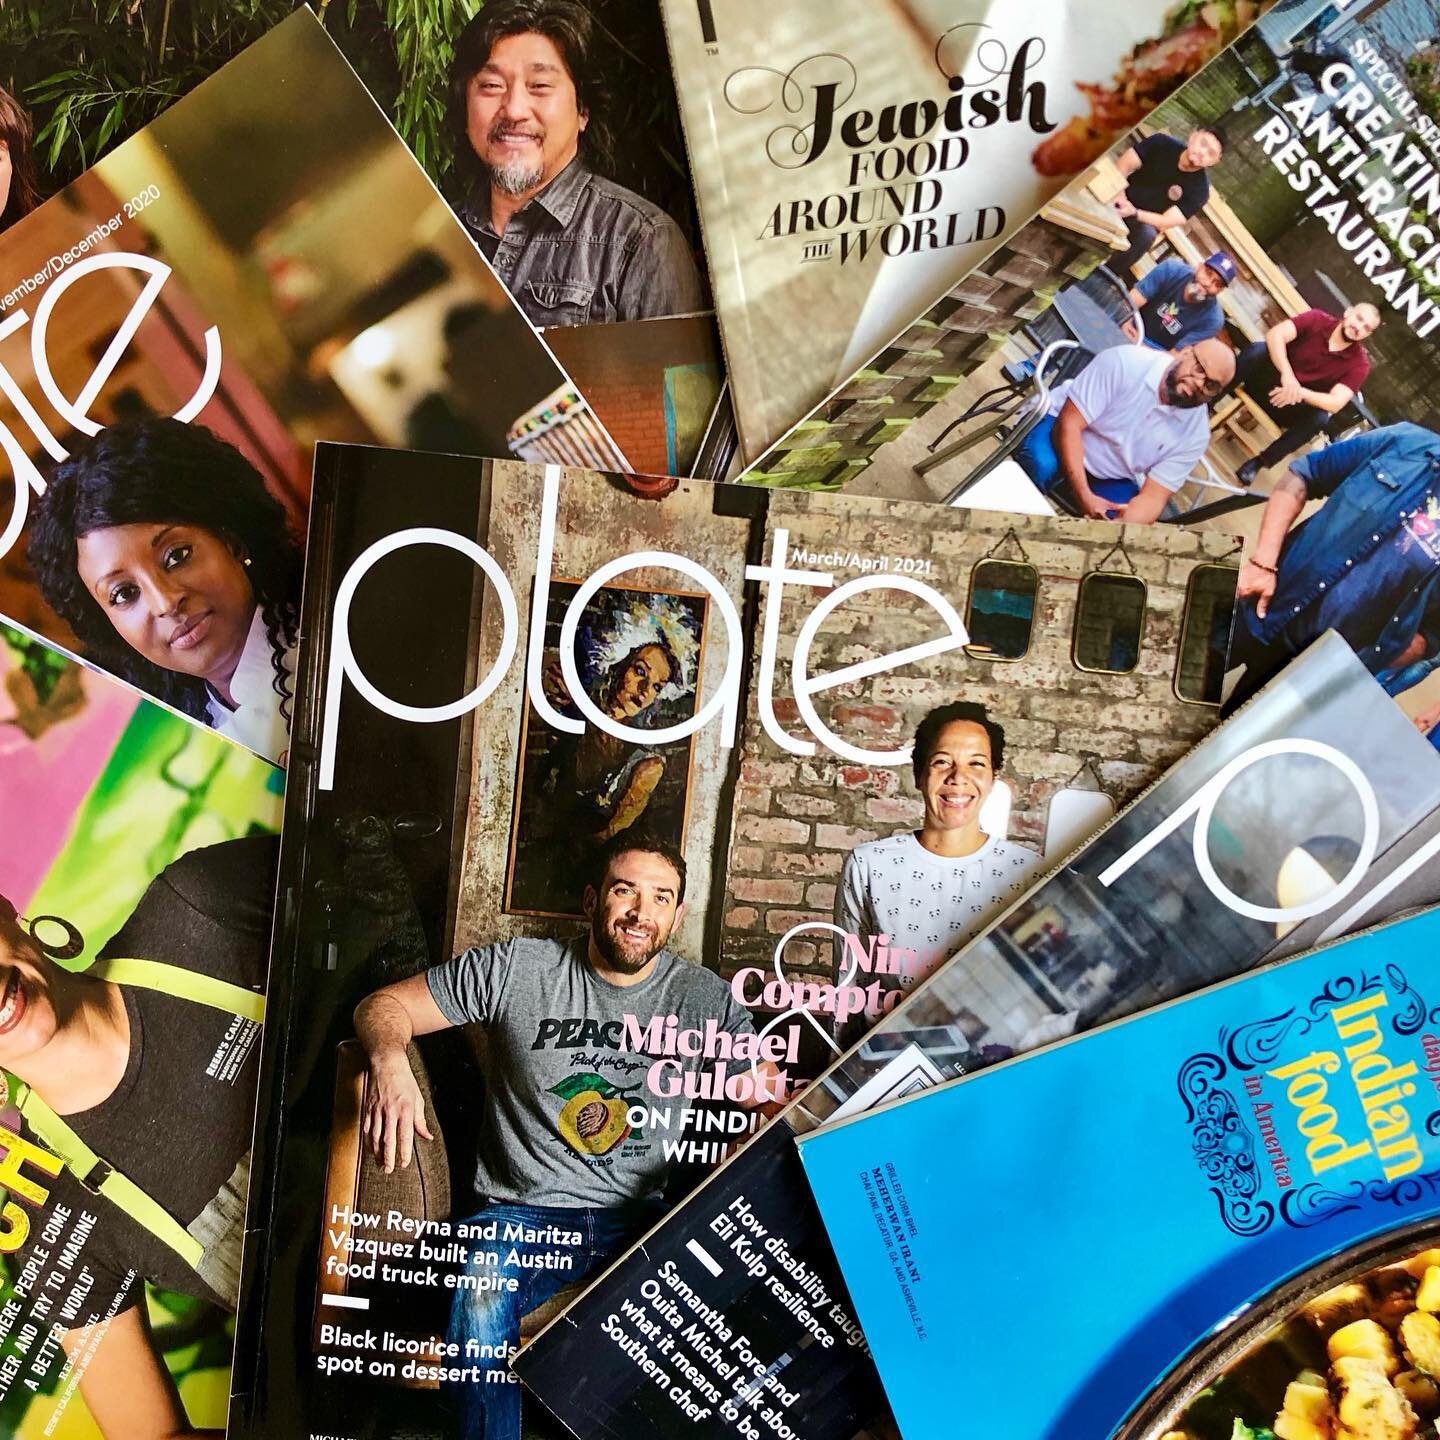 Some news, as they say. I'm stepping down as editor of @platemagazine June 30. I'll continue as editor-at-large, but am looking forward to some time off to work on other projects. I'm super proud of the work we did in the last 15 (!) years and excite